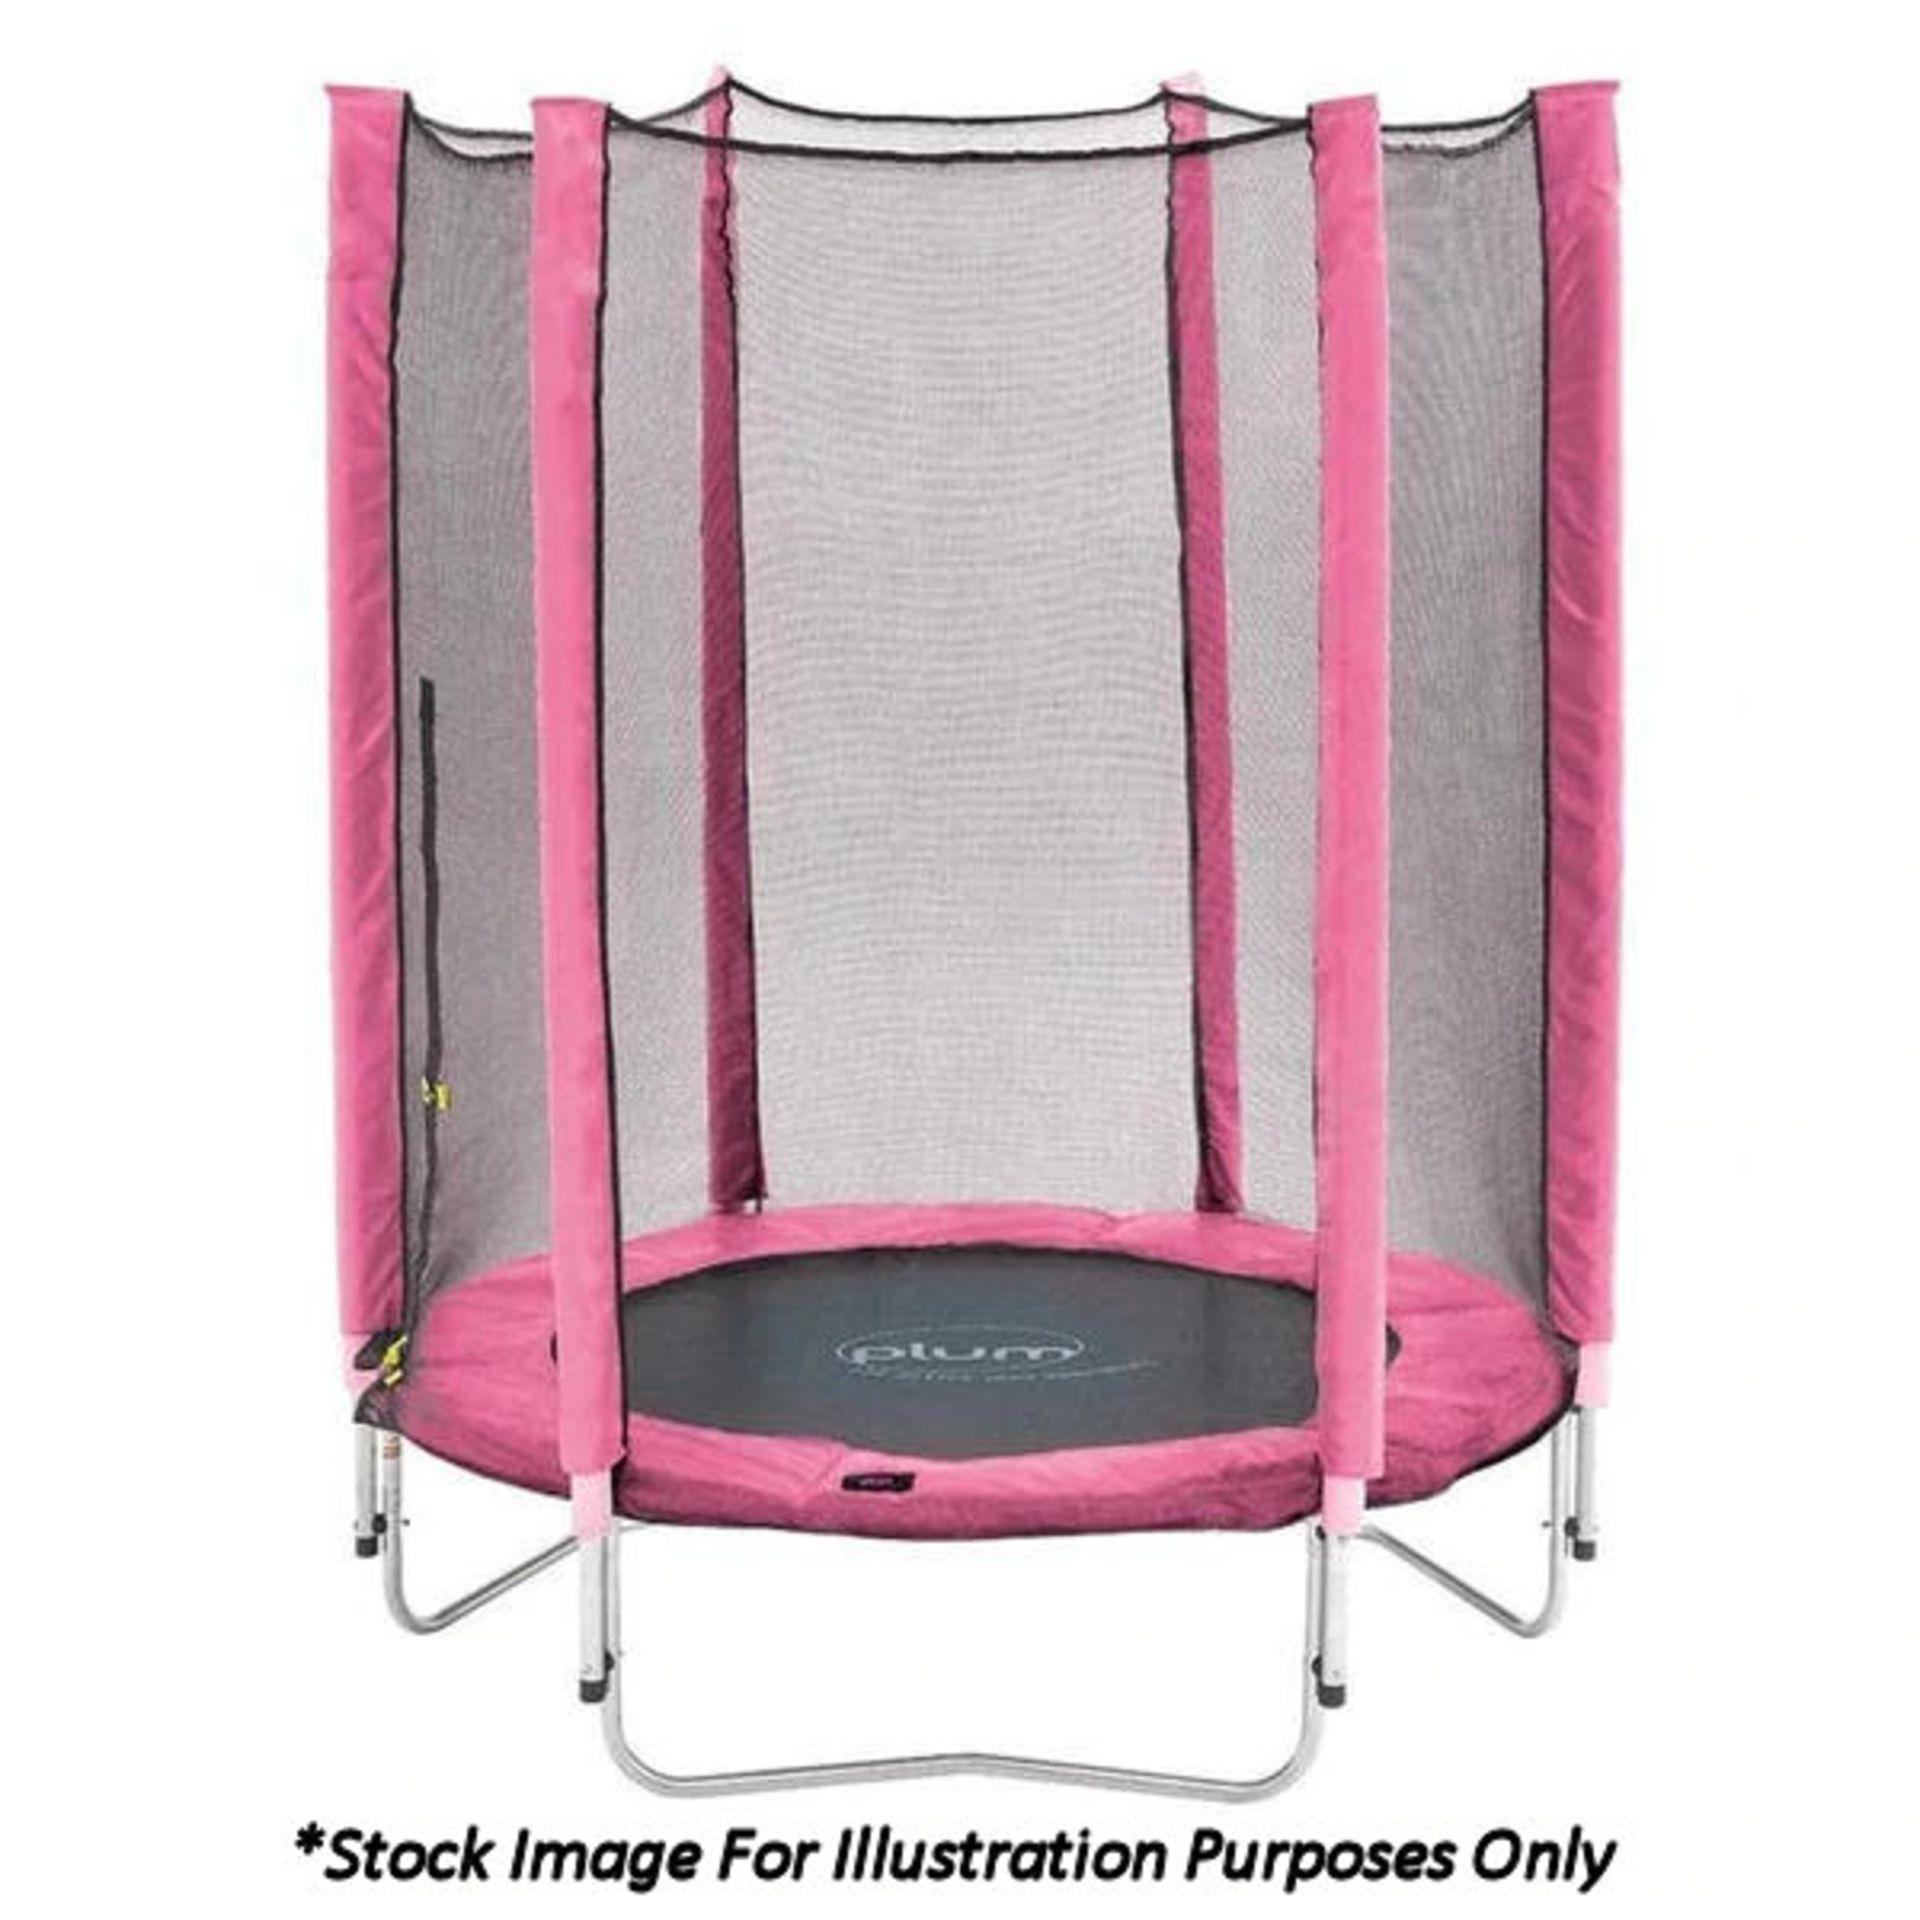 1 x Plum 1.4m/4.5ft Junior Trampoline and Enclosure in Pink - New/Boxed